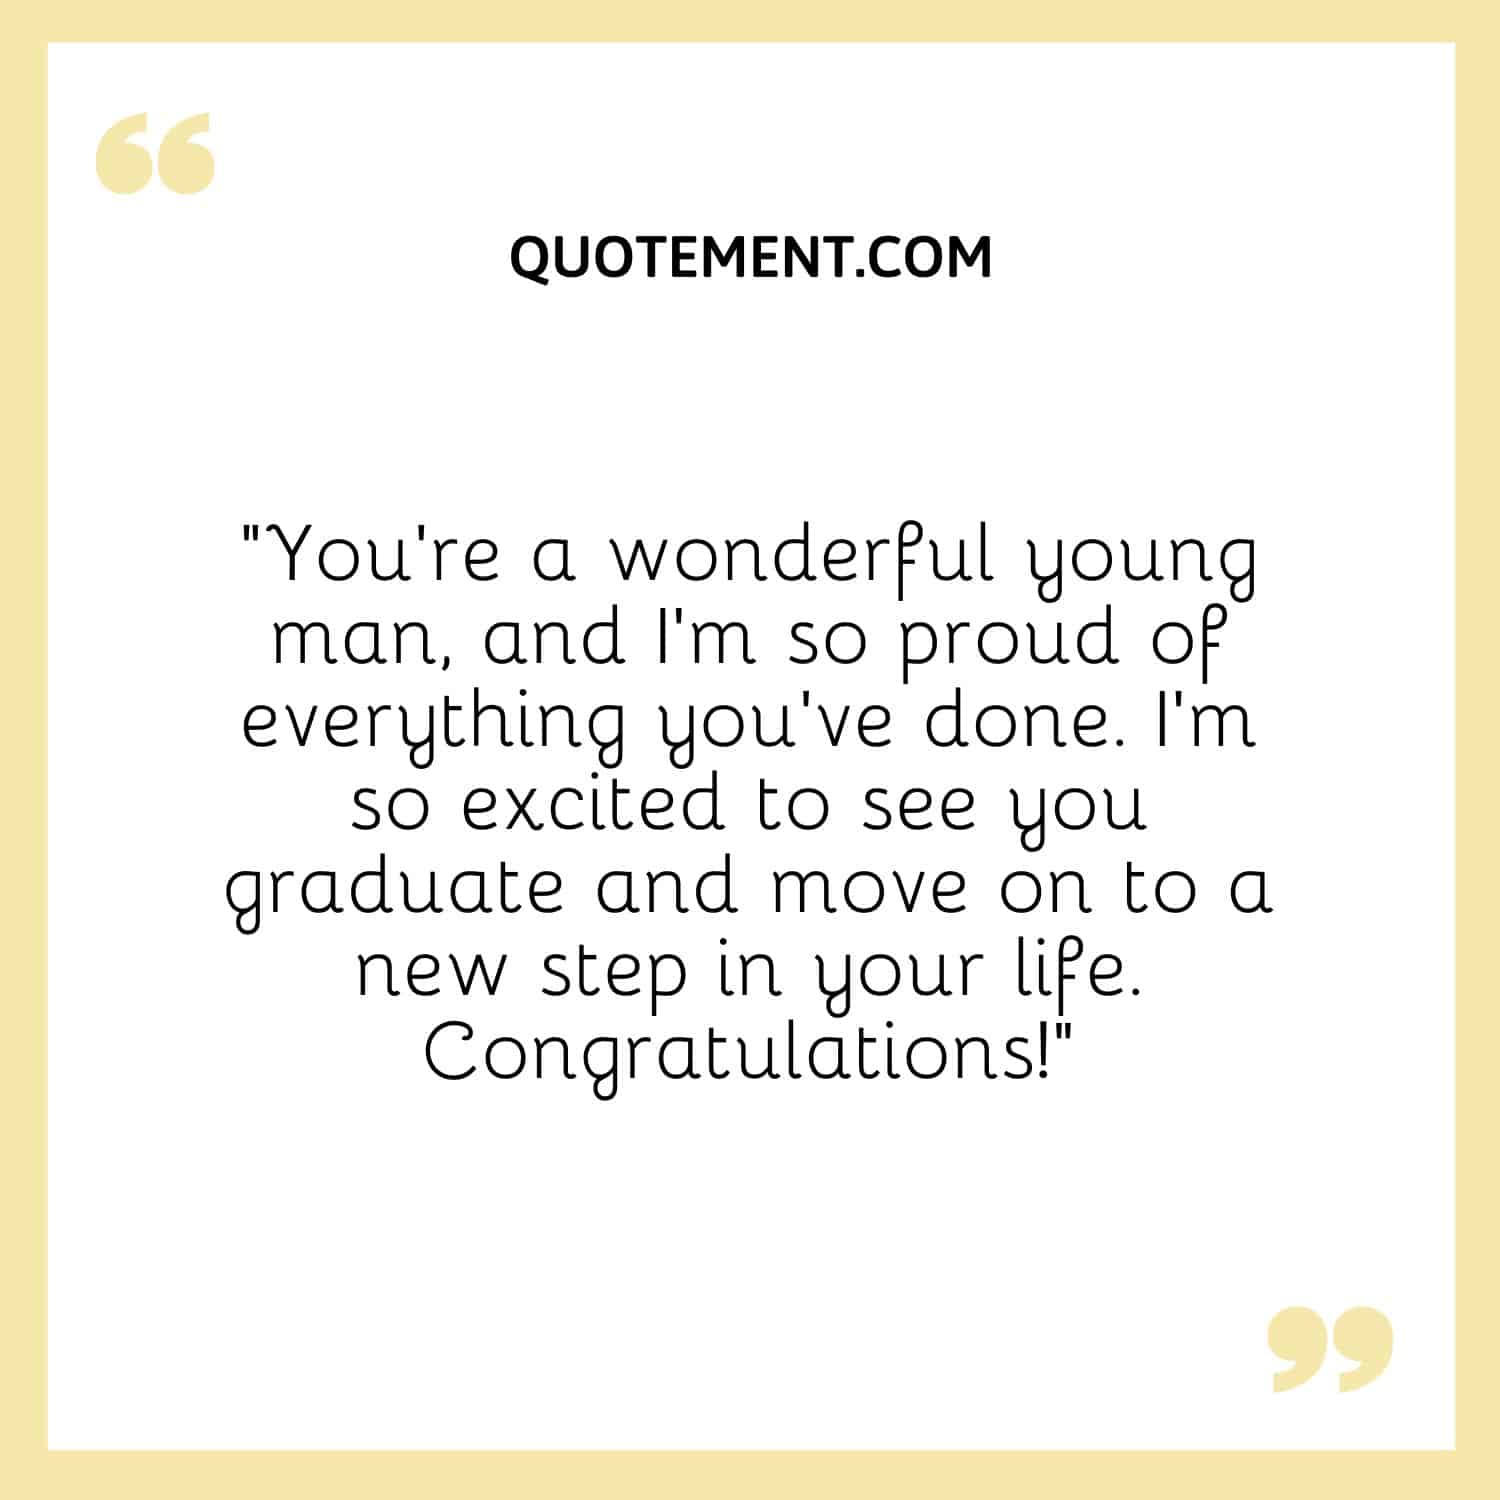 “You’re a wonderful young man, and I’m so proud of everything you’ve done. I’m so excited to see you graduate and move on to a new step in your life. Congratulations!”